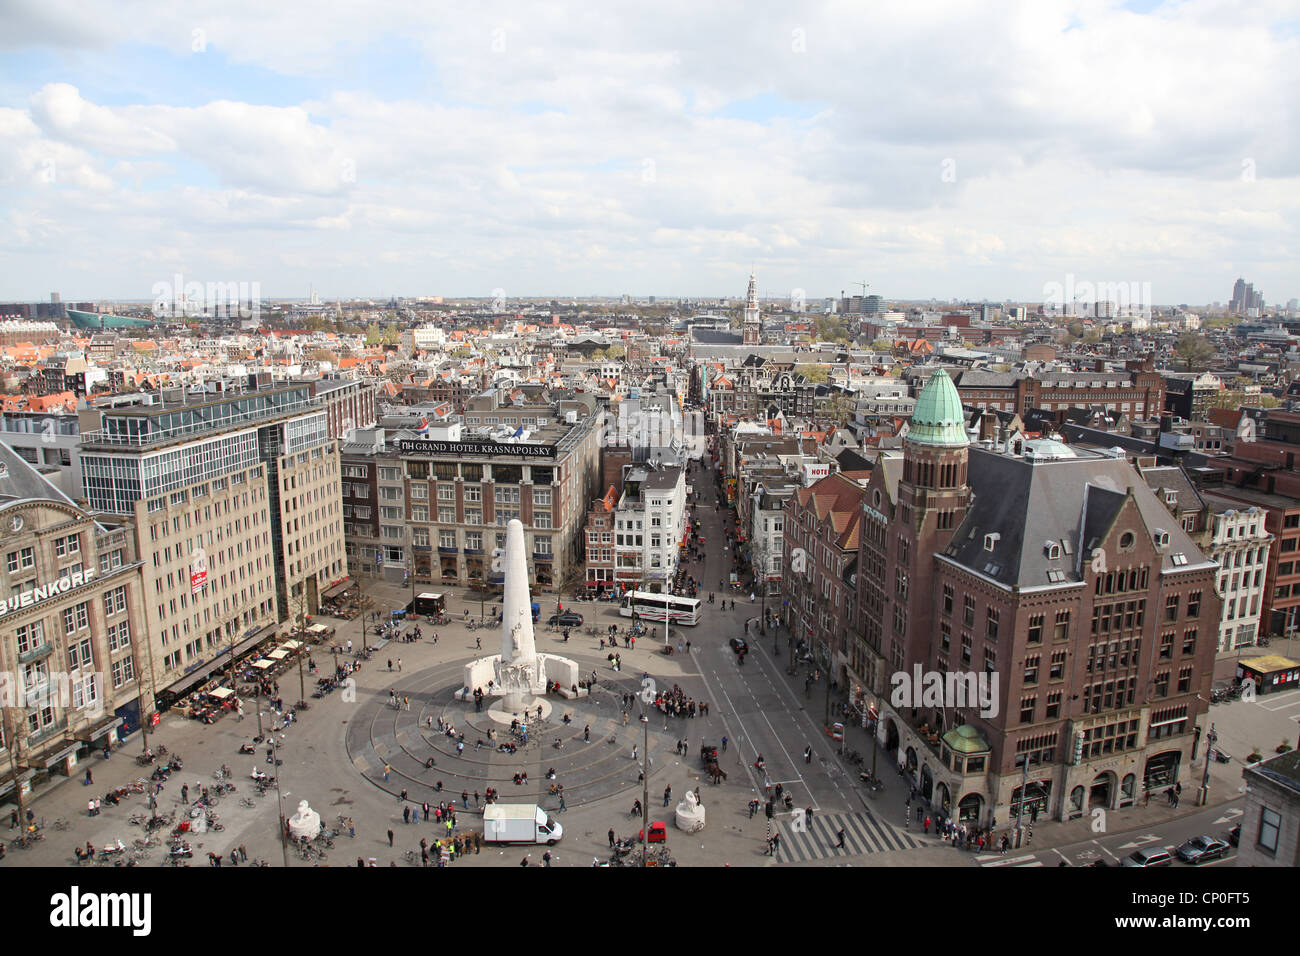 Netherlands. Amsterdam. The National Monument World War II monument on Dam Square Stock Photo